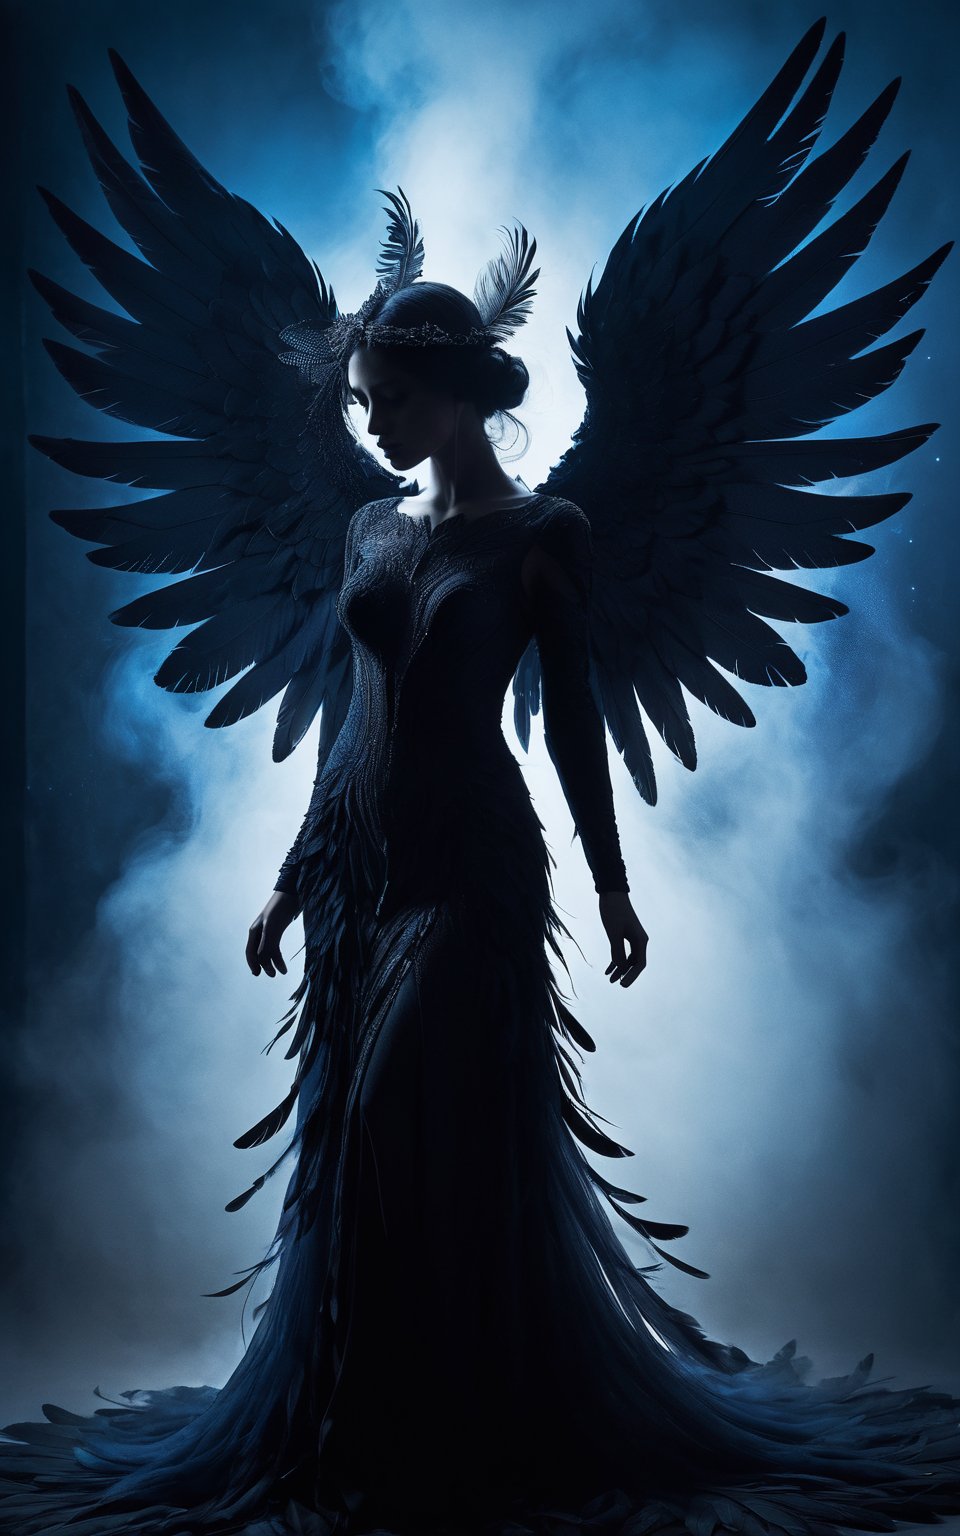 (dark, ethereal, highly detailed, high contrast) A silhouette of a figure with large, dark wings extending from their back, surrounded by swirling, smoky mist. The scene is illuminated by a cold, blue light, creating a mysterious and otherworldly atmosphere. The wings are detailed with individual feathers, and the edges appear to be disintegrating into particles. The figure's head is bowed, adding to the somber and melancholic mood. The background is a deep, shadowy blue, enhancing the ethereal and mystical vibe of the image.